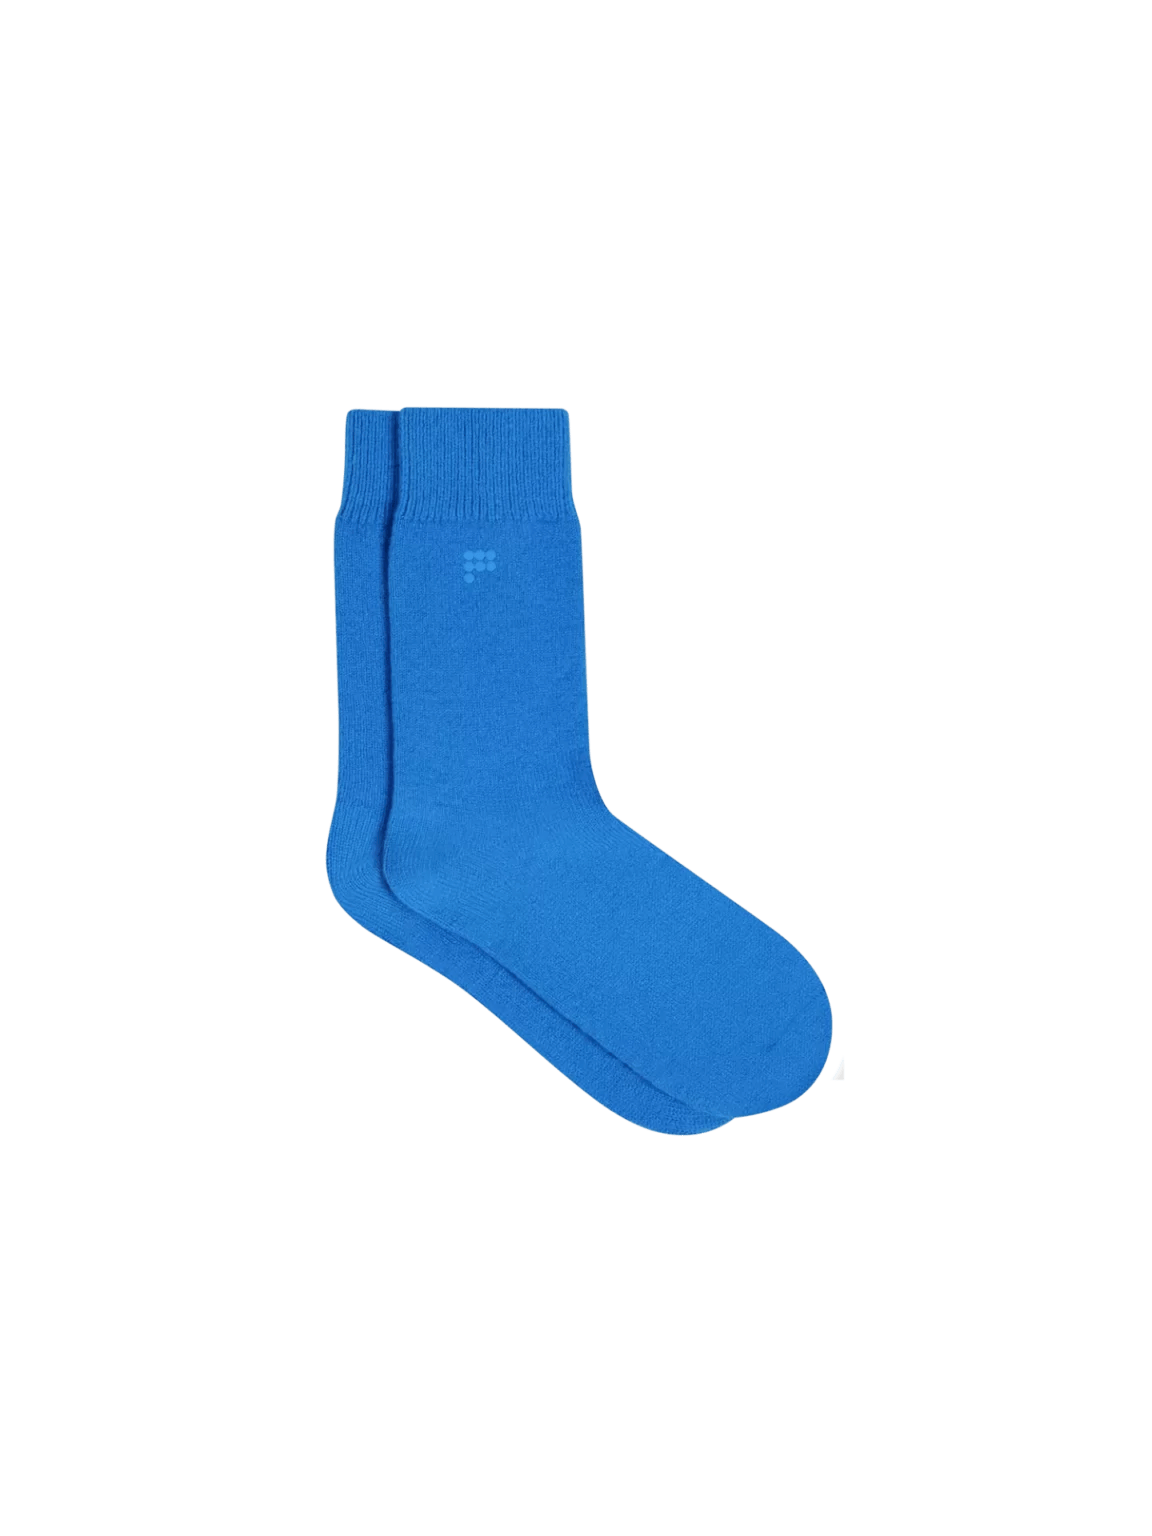 pangaia recycled cashmere socks christmas gift for men